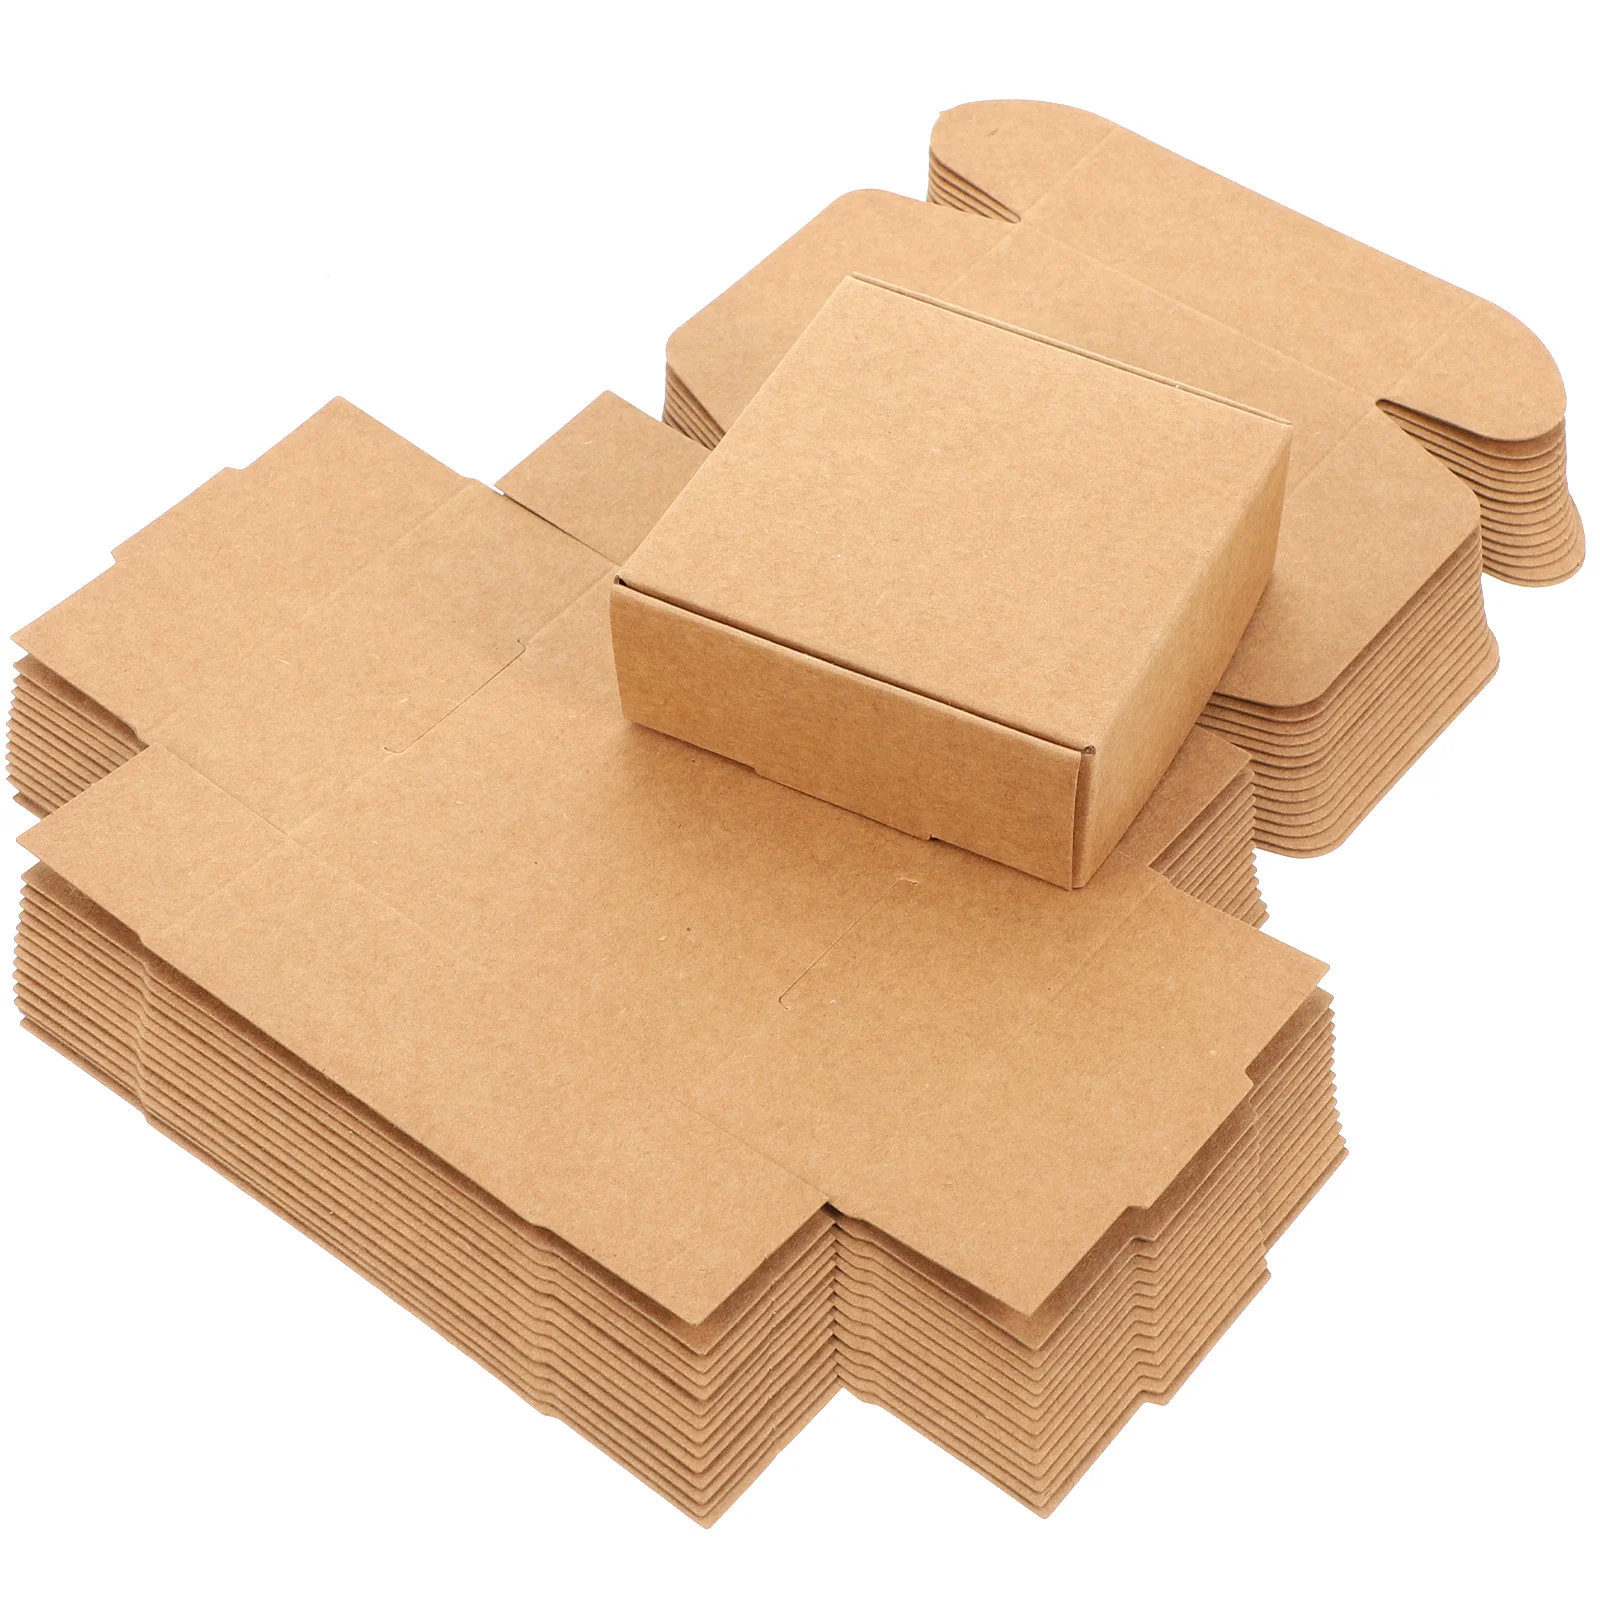 

15pcs Kraft Paper Boxes Handmade Soap Wrapping Boxes Gift Packing Boxes